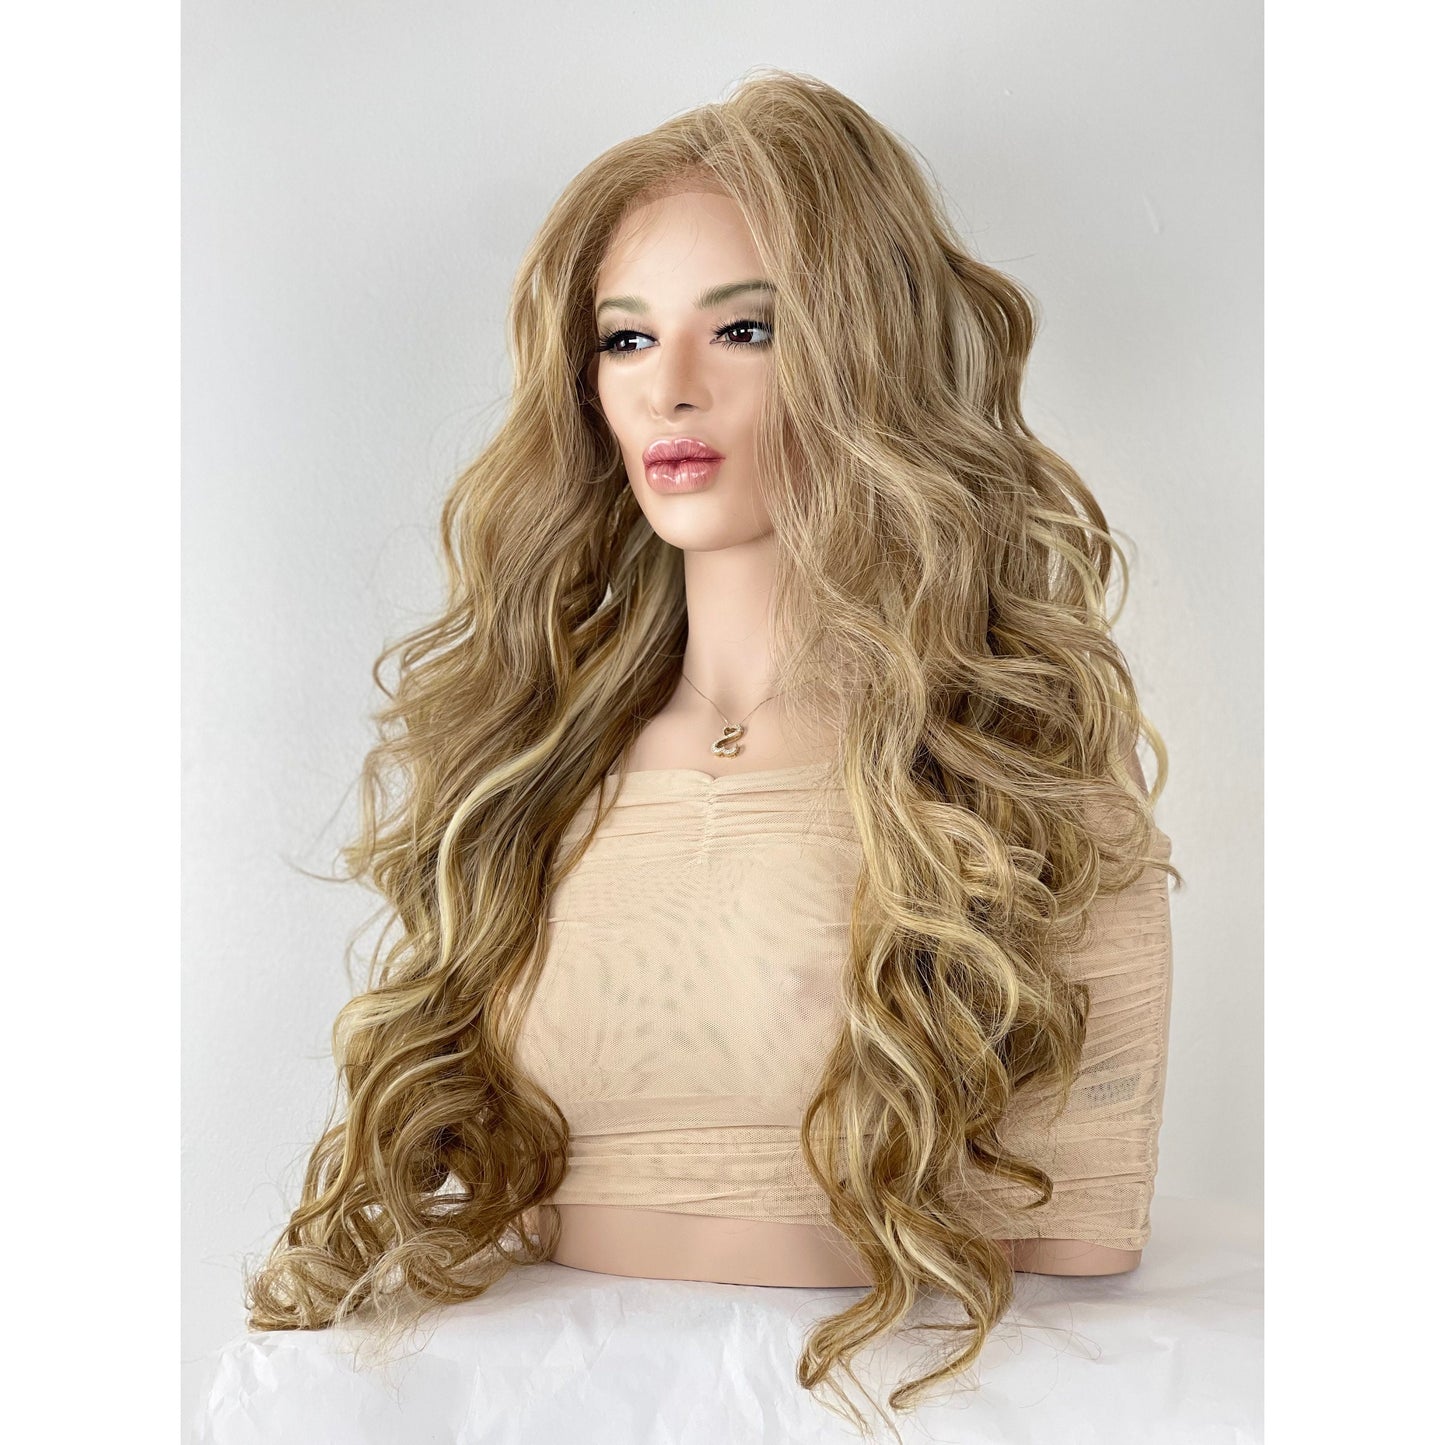 Blonde Balayage 13x5 wide part lace front wig / Ombre Wavy Blonde Luxury Human Hair Blend Wig